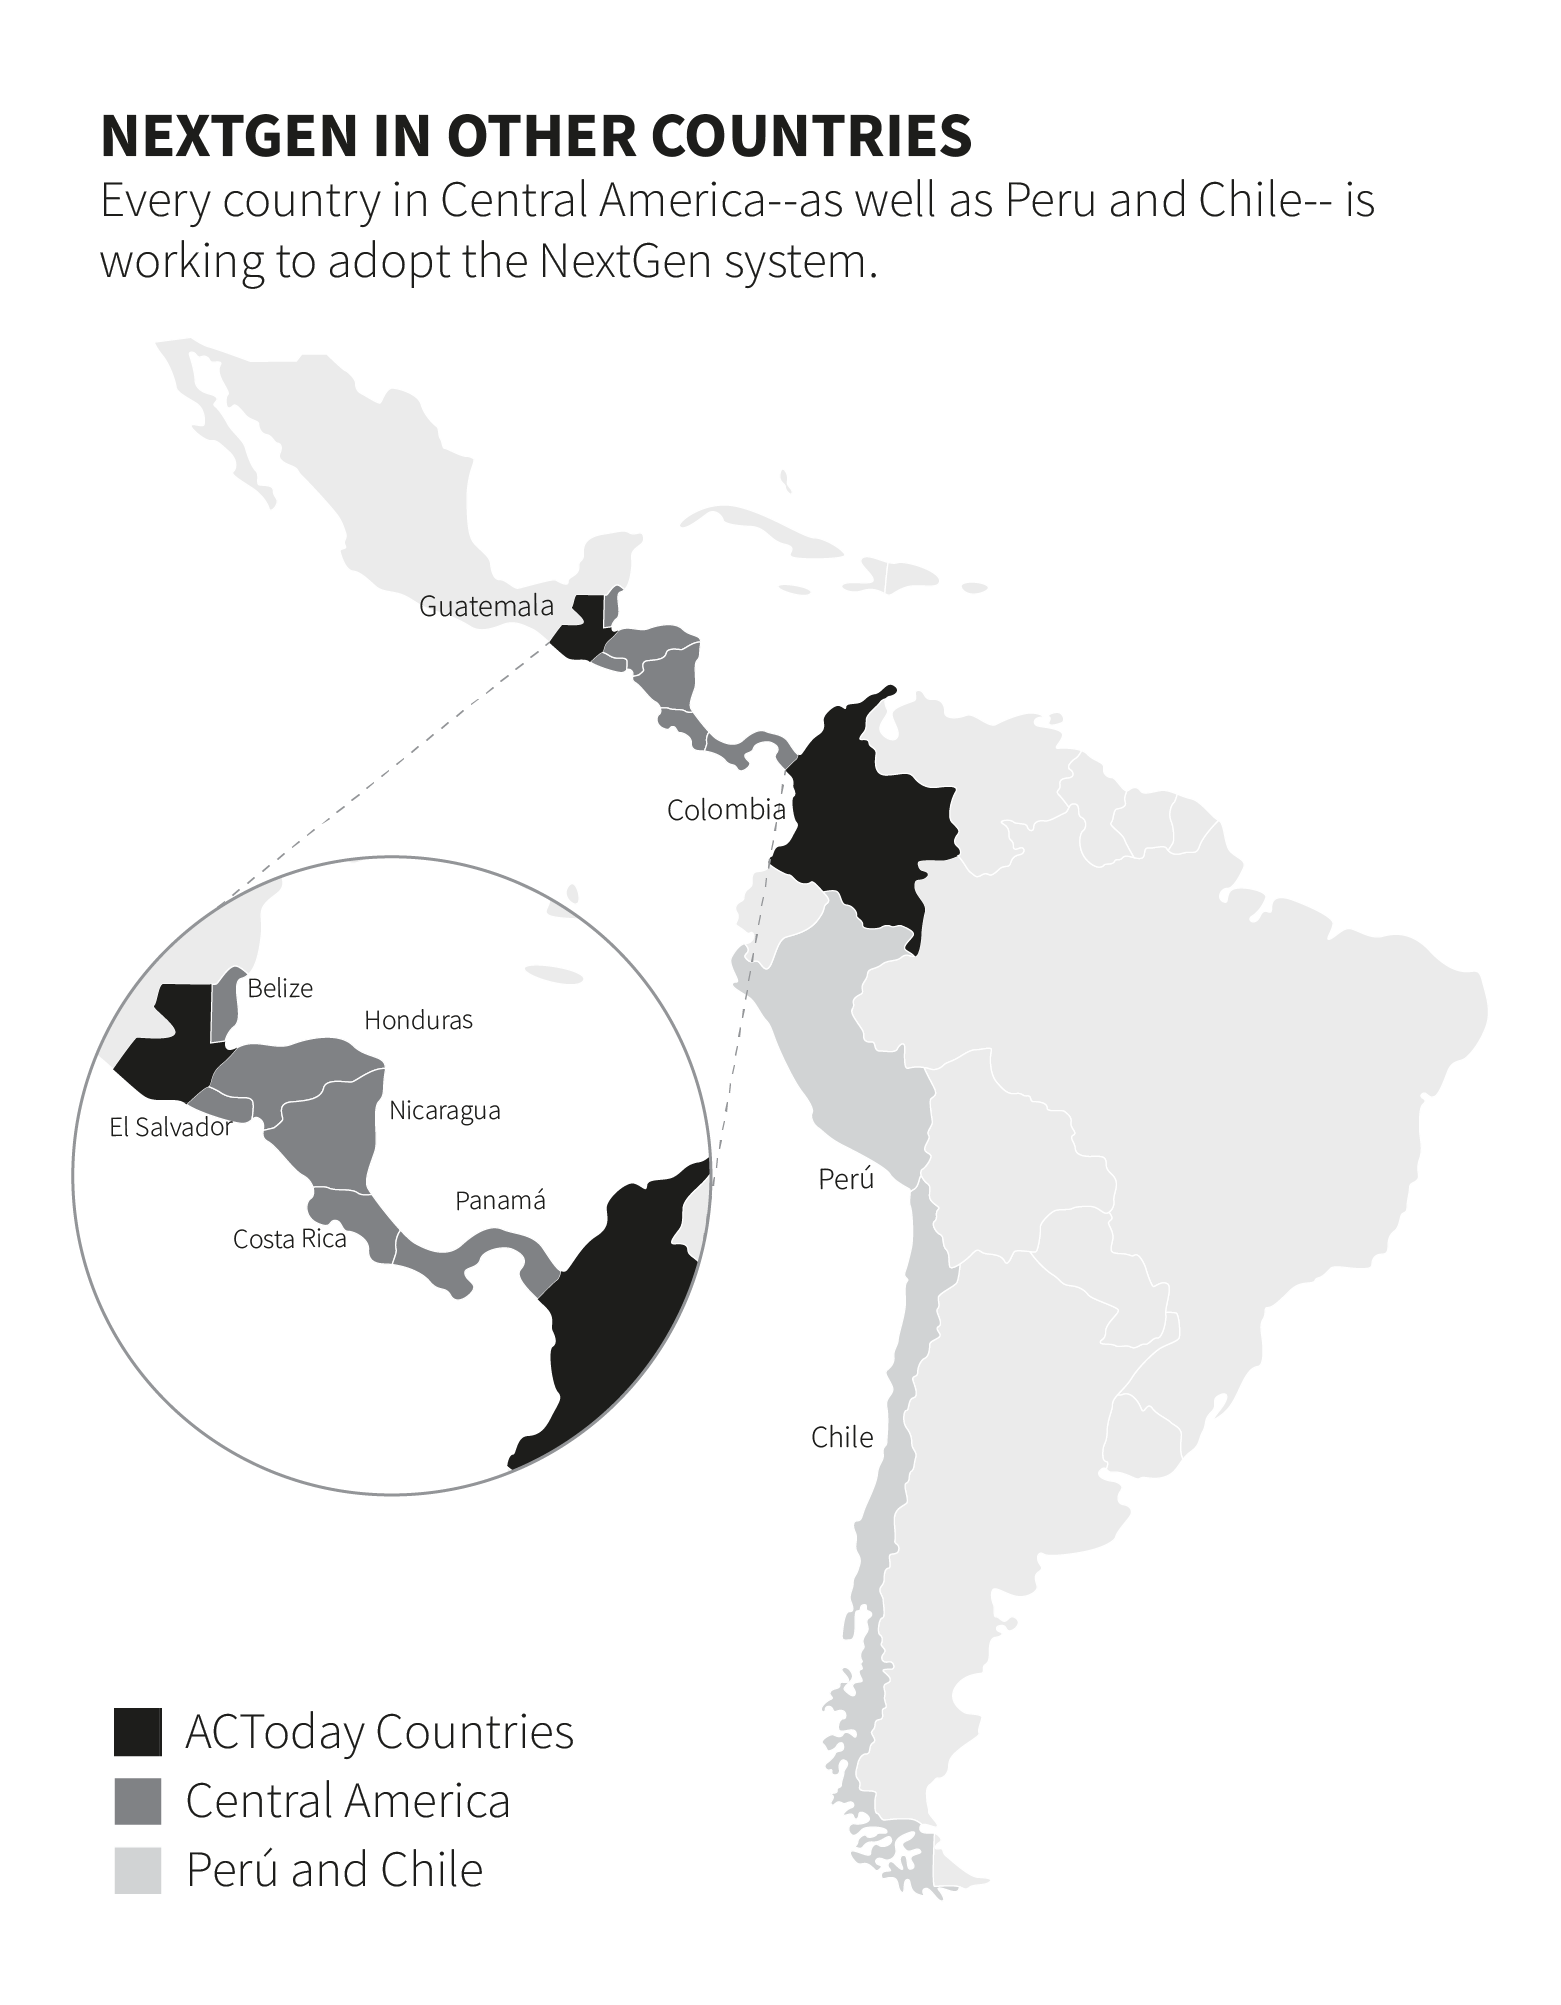 The headline of the image reads "NextGen in other countries" with the text below it: "Every country in Central America—as well as Peru and Chile—is working to adopt the NextGen system." A map of Central and South America below uses a greyscale key to identify the ACToday Countries (in black: Guatemala and Colombia), Central America (in dark grey: Belize, Honduras, El Salvador, Nicaragua, Costa Rica and Panamá) and (in light grey) Perú and Chile.